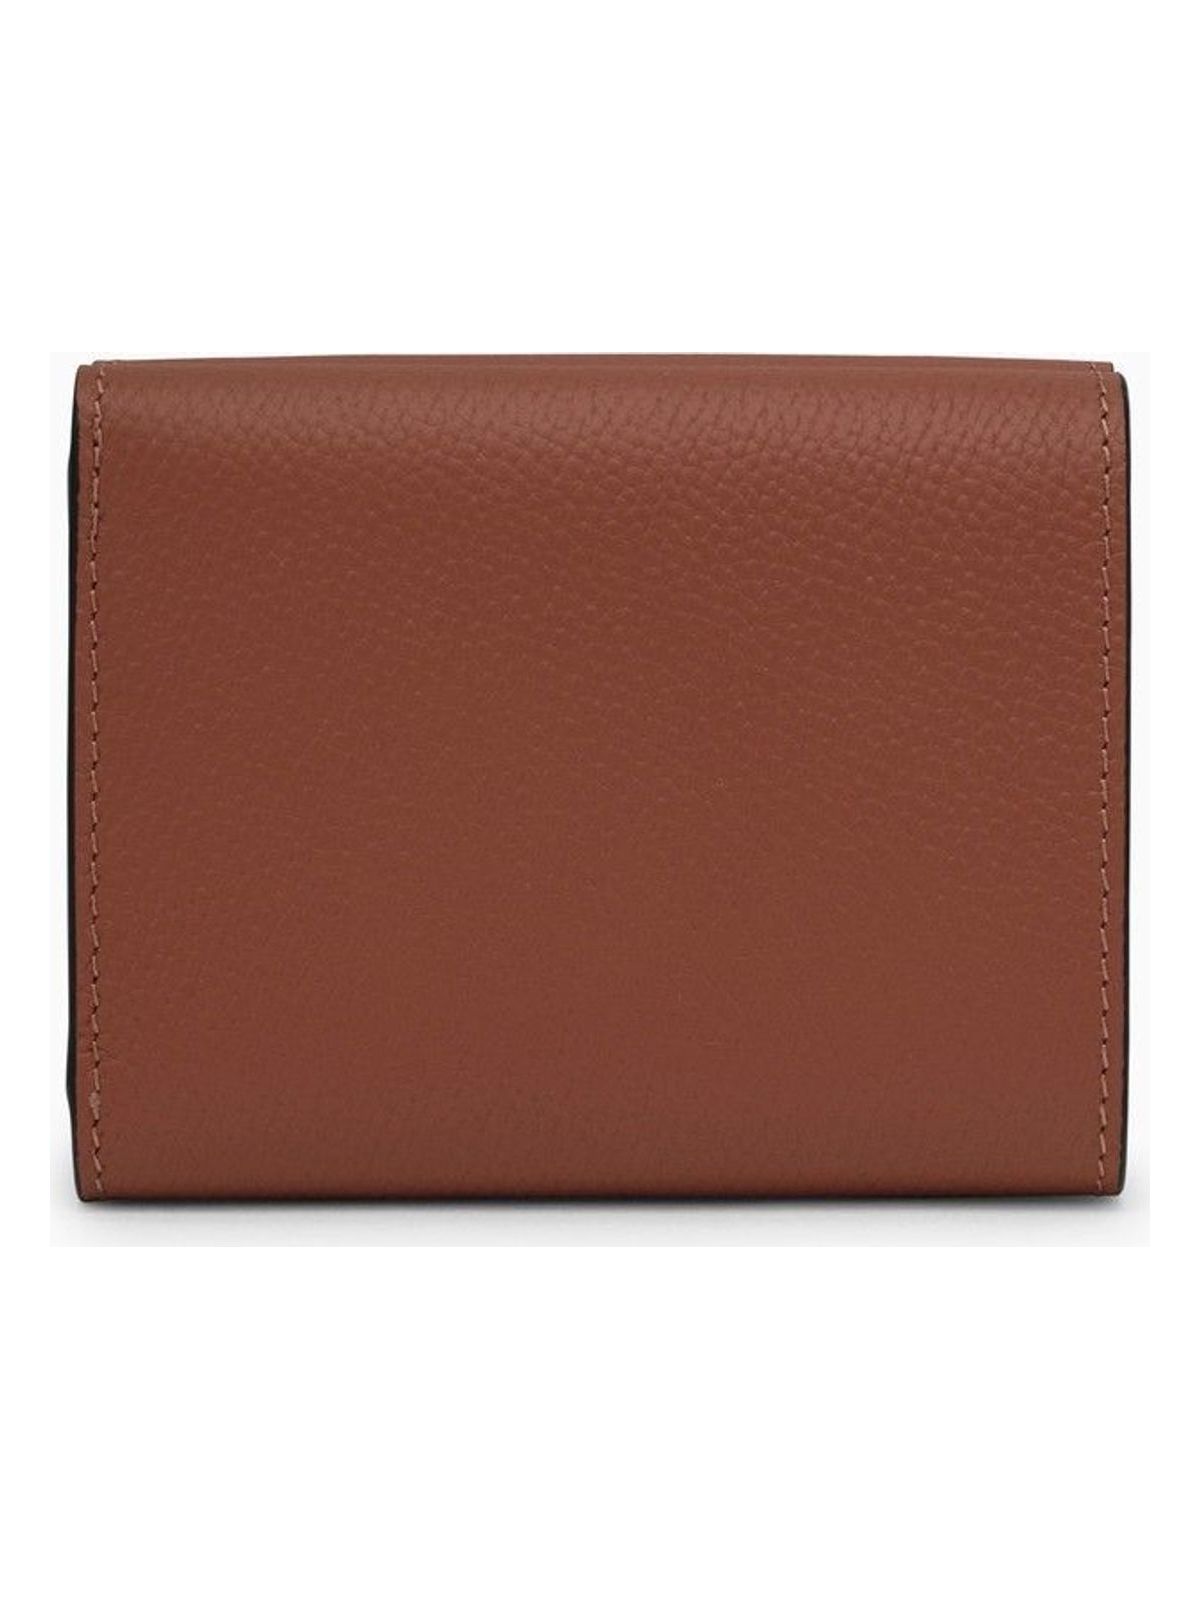 2530 LOEWE  ANAGRAM BROWN GRAINED LEATHER TRIFOLD WALLET